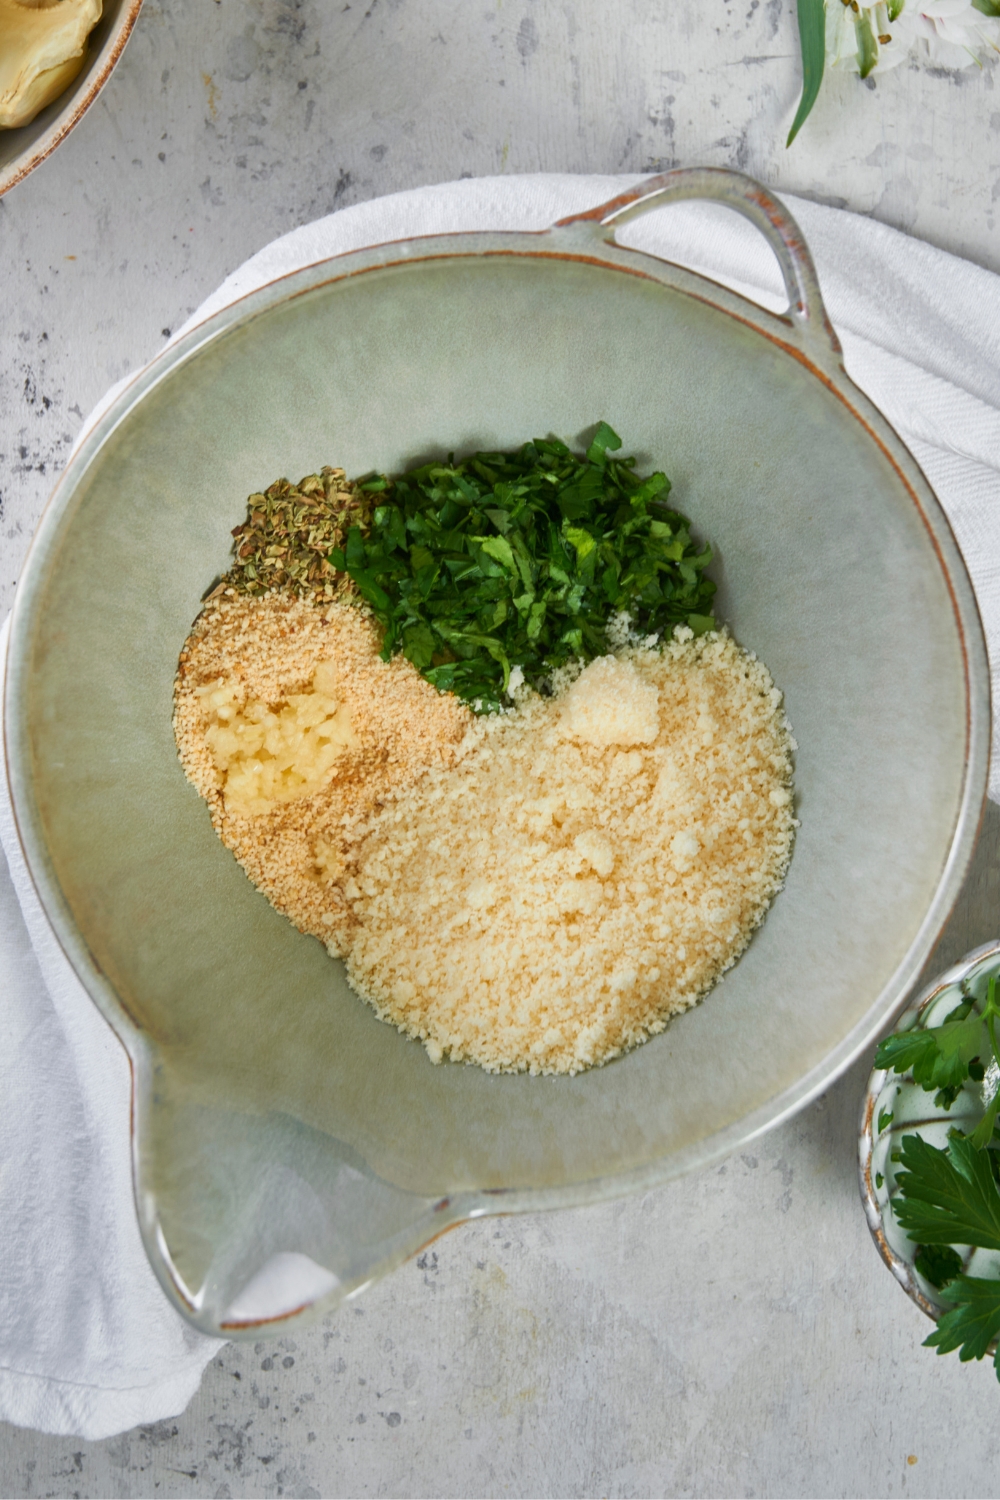 A bowl with bread crumbs, parmesan cheese and seasonings.